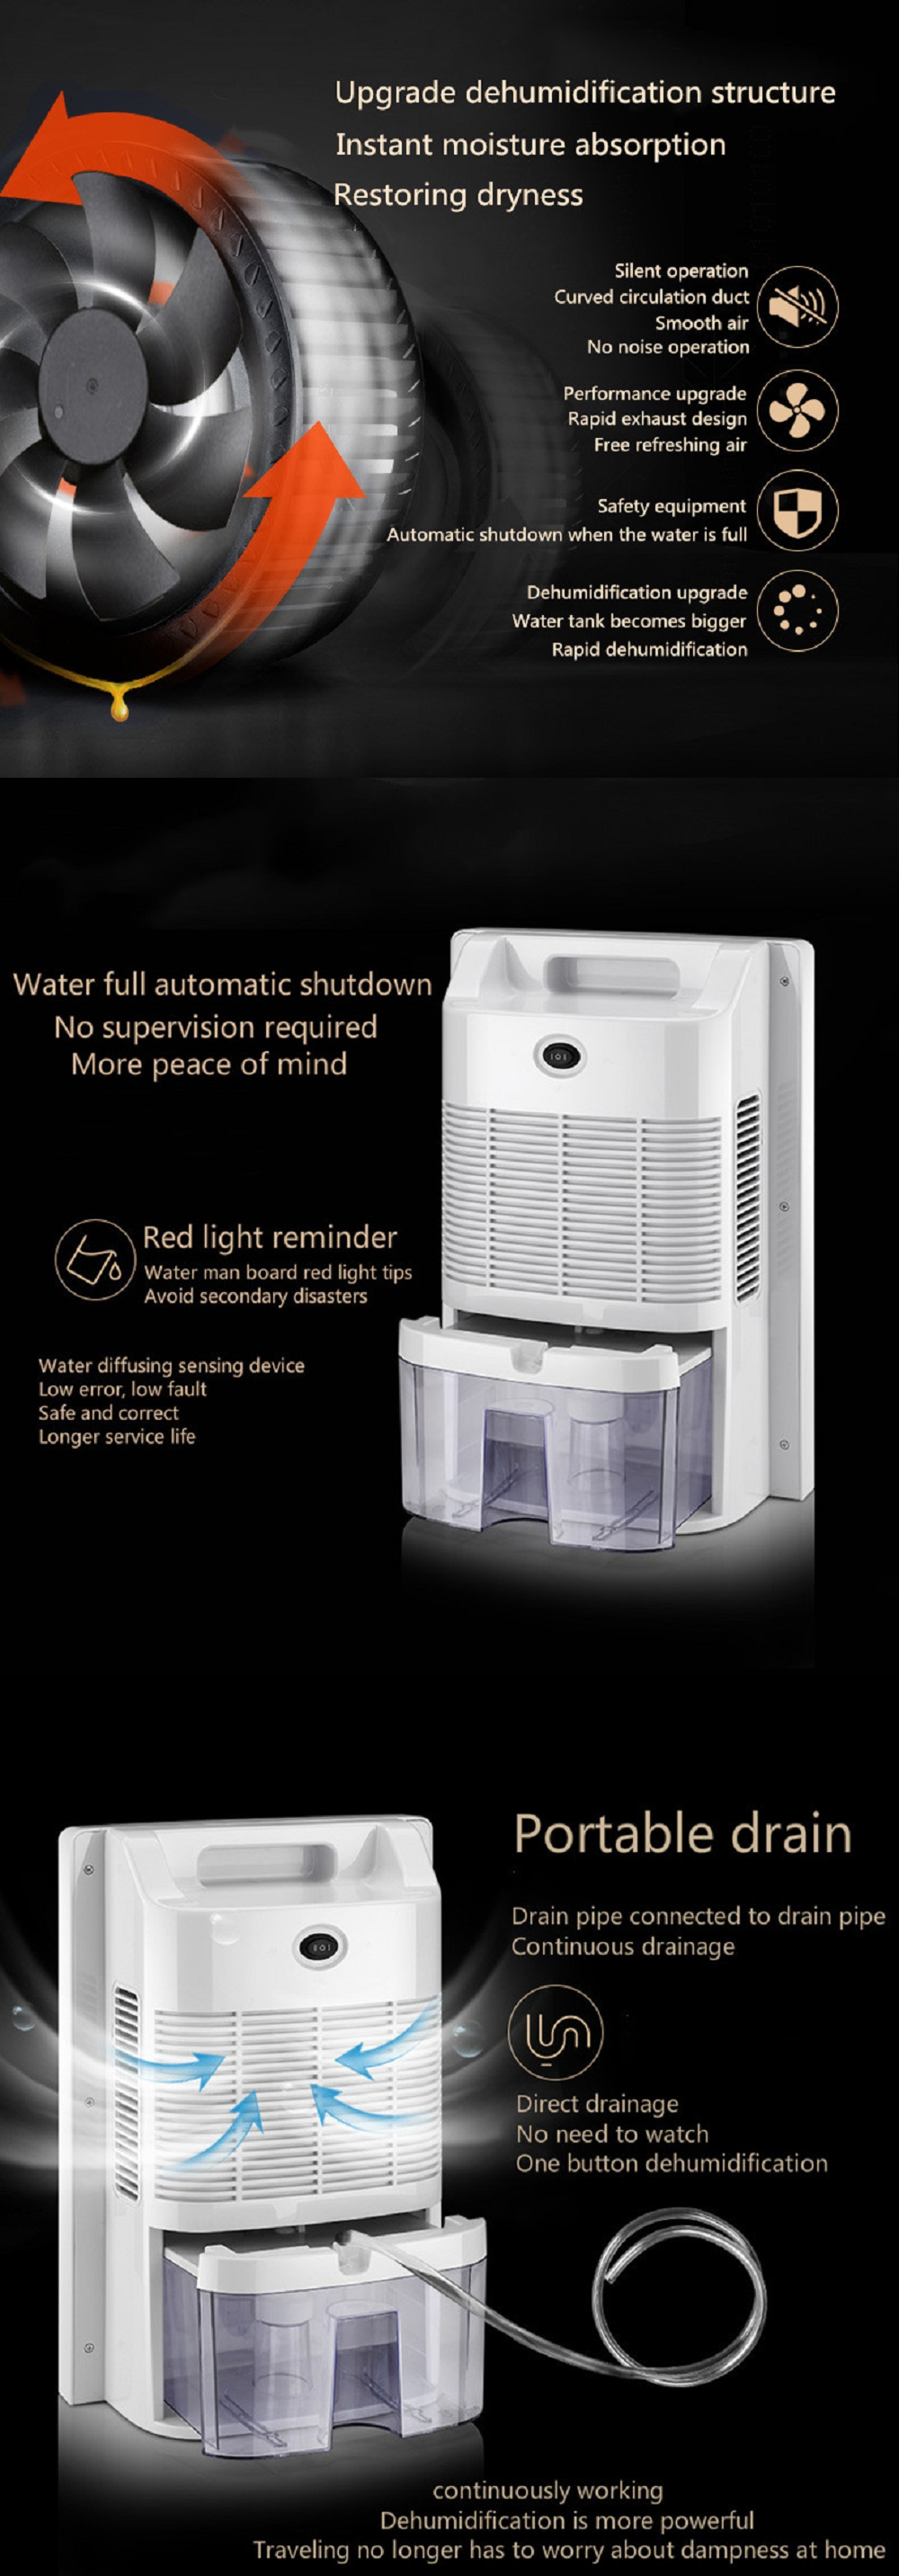 90W-Dehumidifier-Moisture-Absorber-Indoor-Dehumidifier-LCD-Display-Low-Noise-Remote-Control-Timing-E-1702908-2